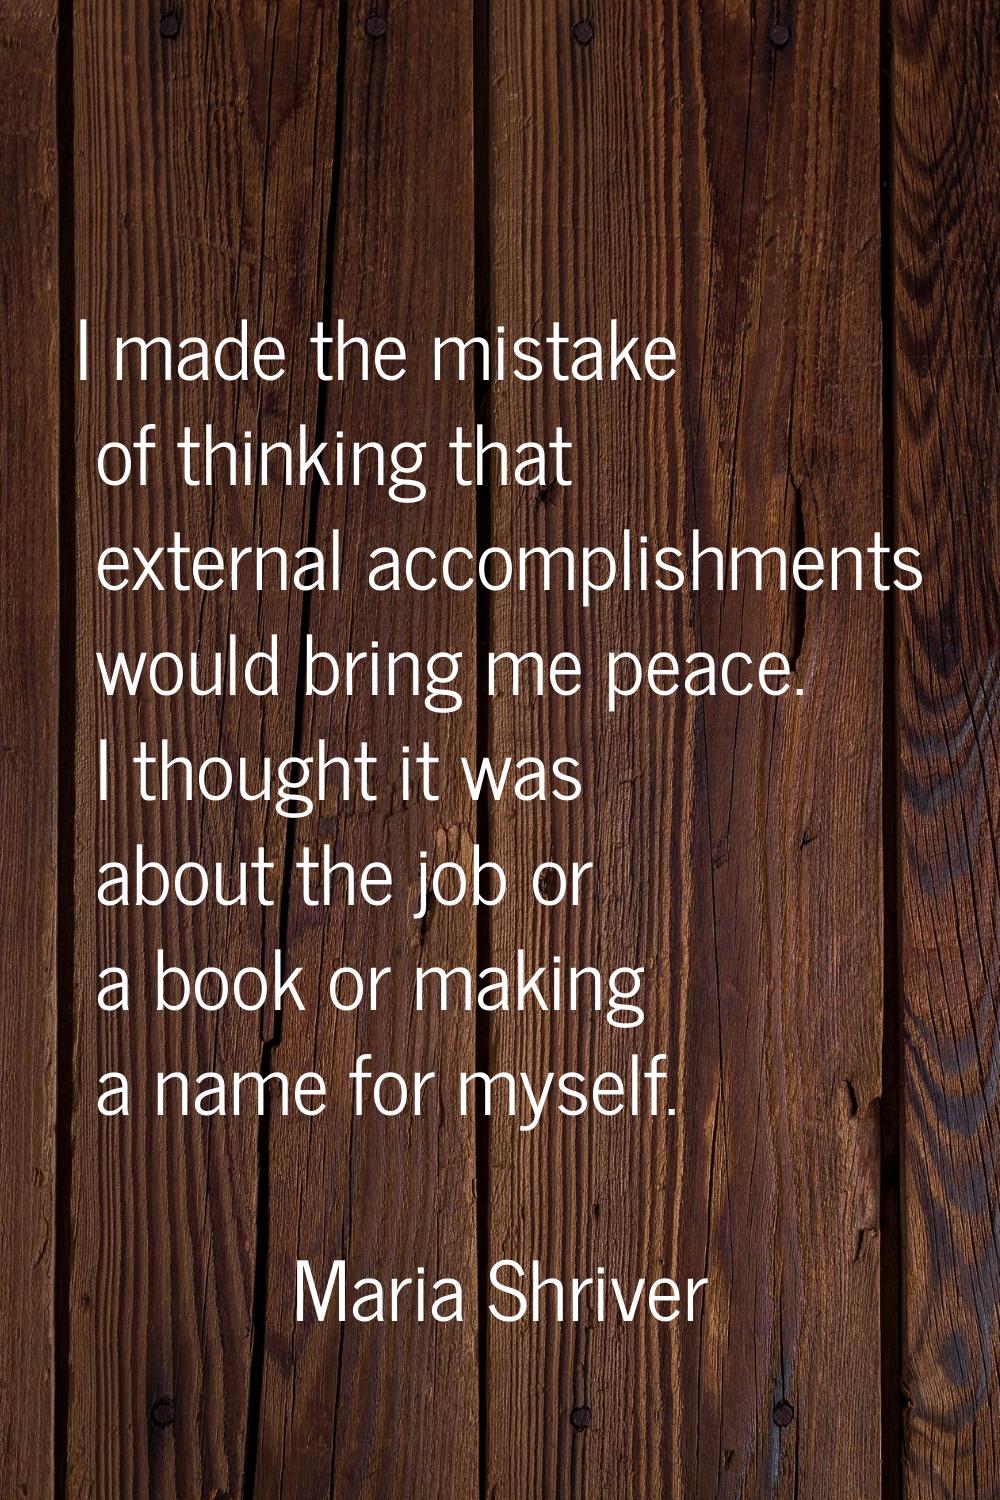 I made the mistake of thinking that external accomplishments would bring me peace. I thought it was